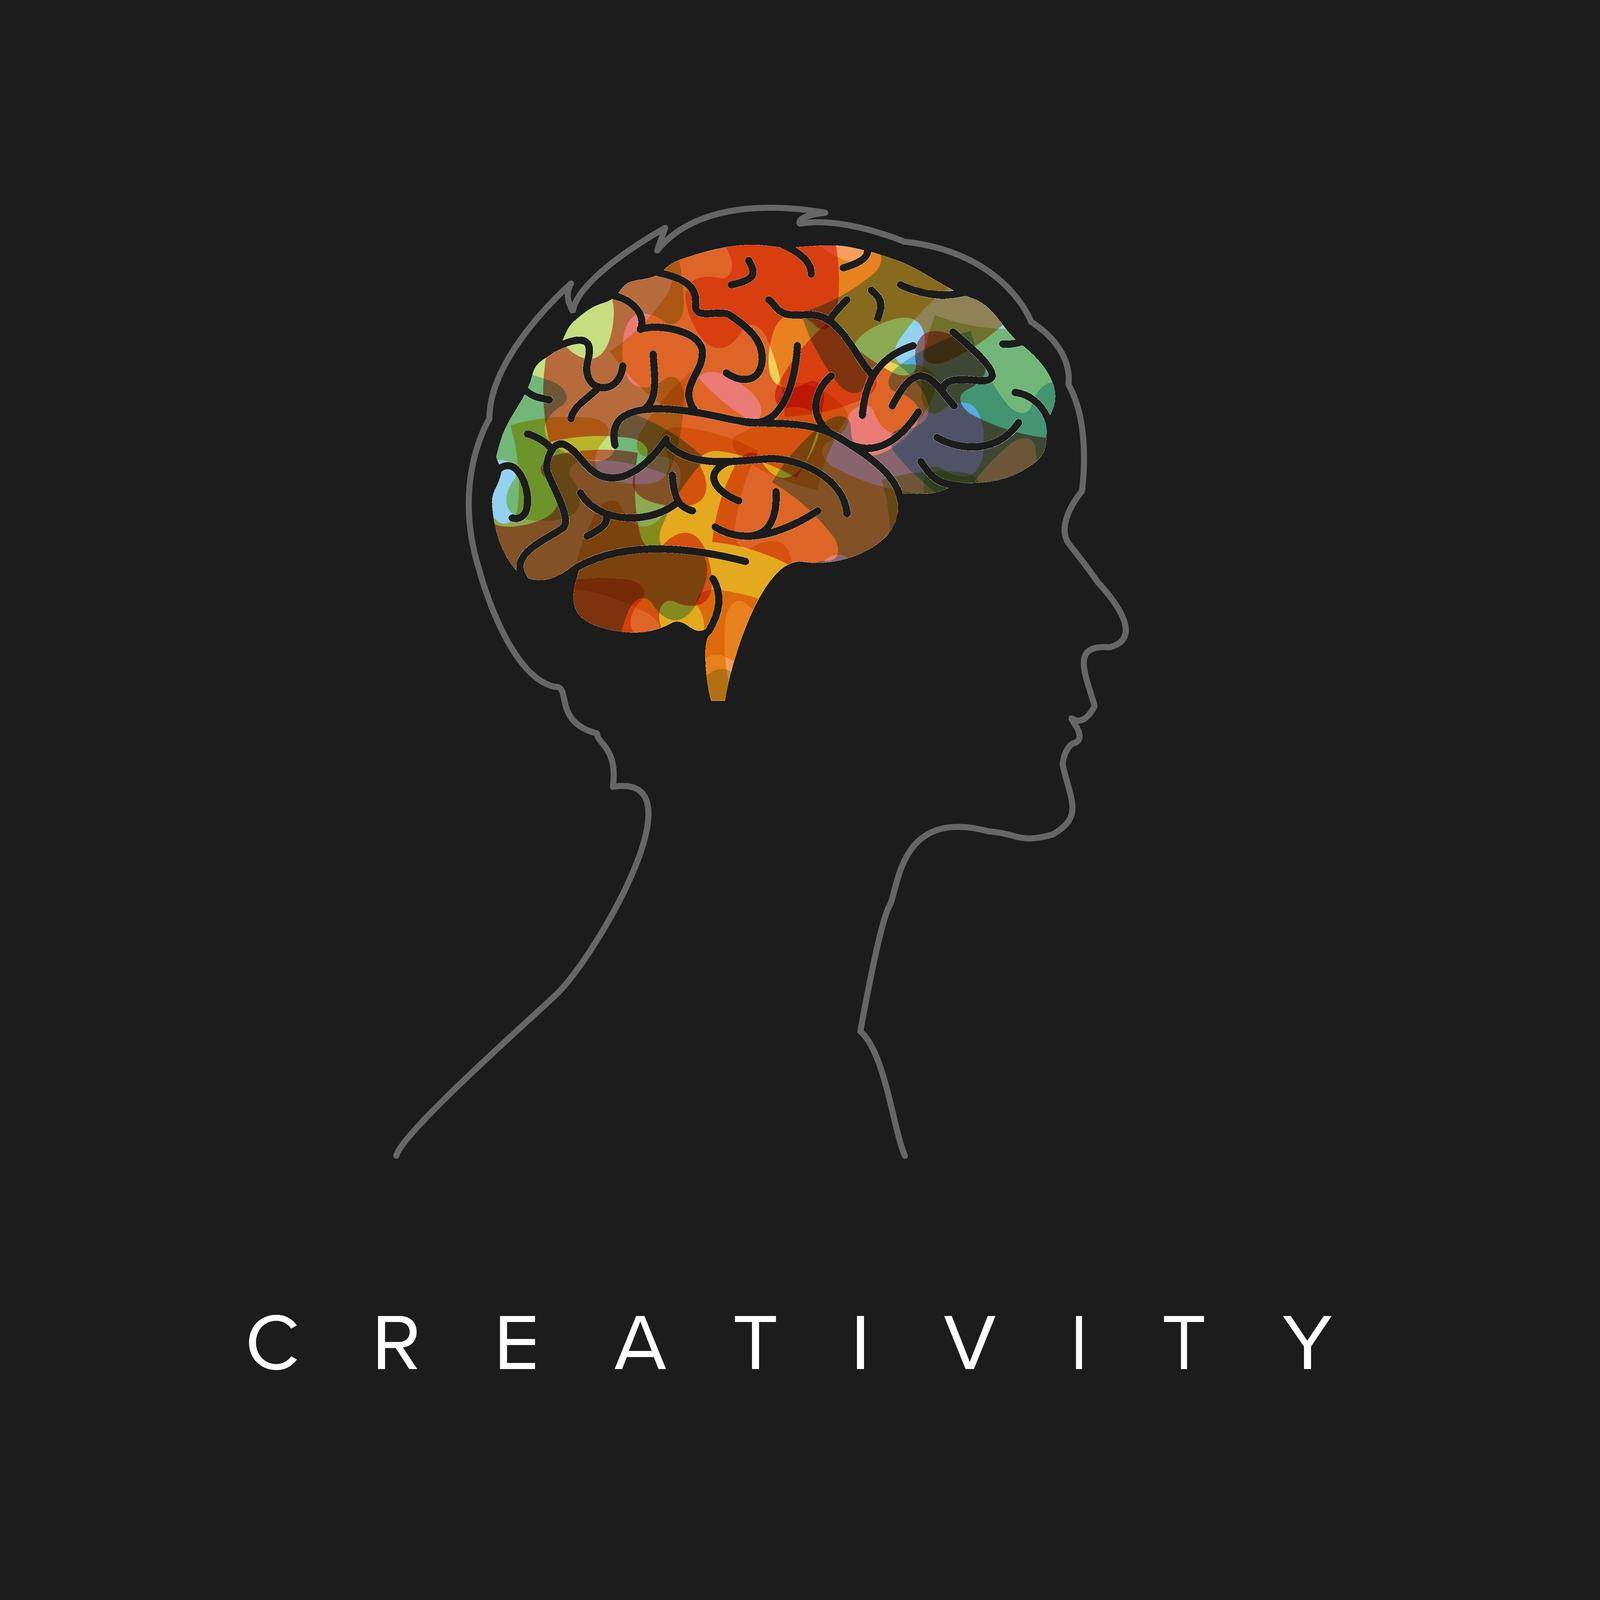 Creativity concept illustration template made from colorful brain icon in the head silhouette - dark version